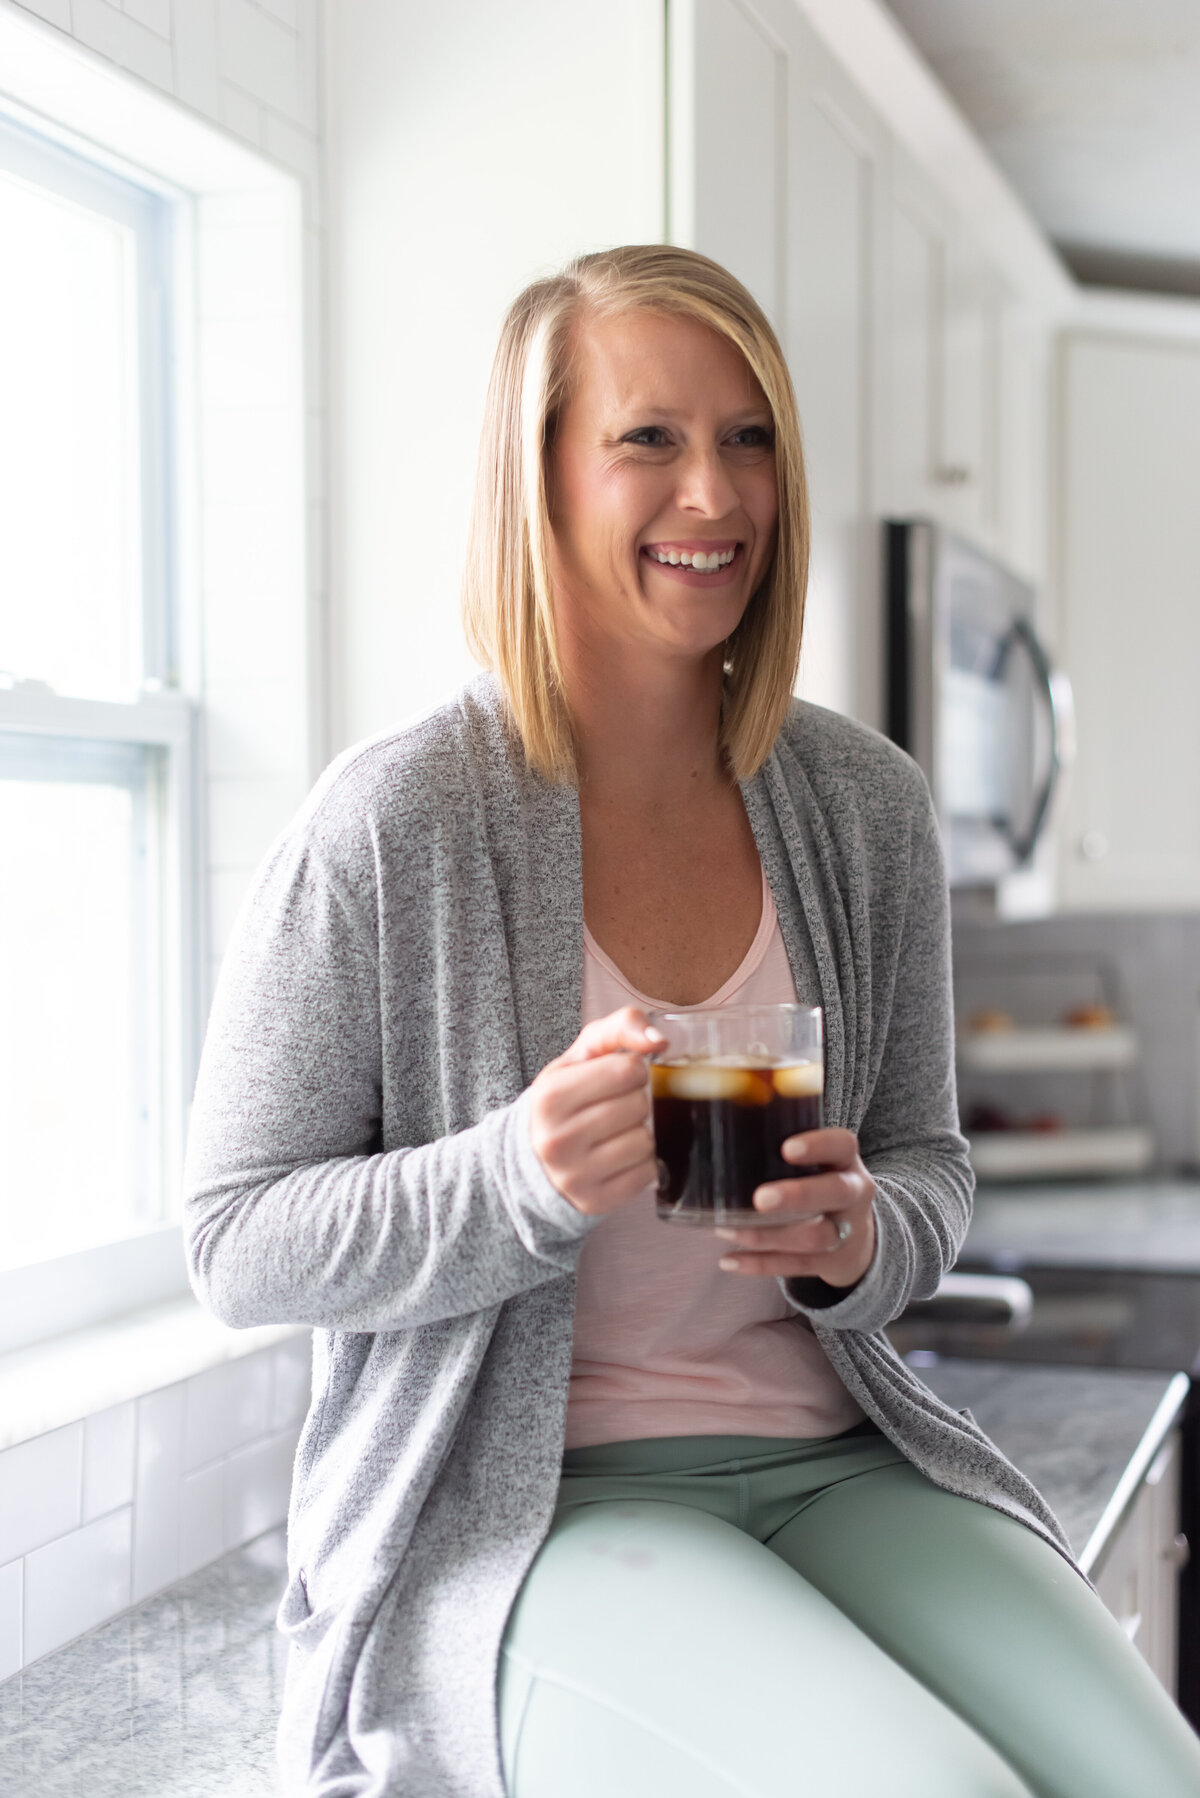 Branding photo of mompreneur in the kitchen holding a iced coffee